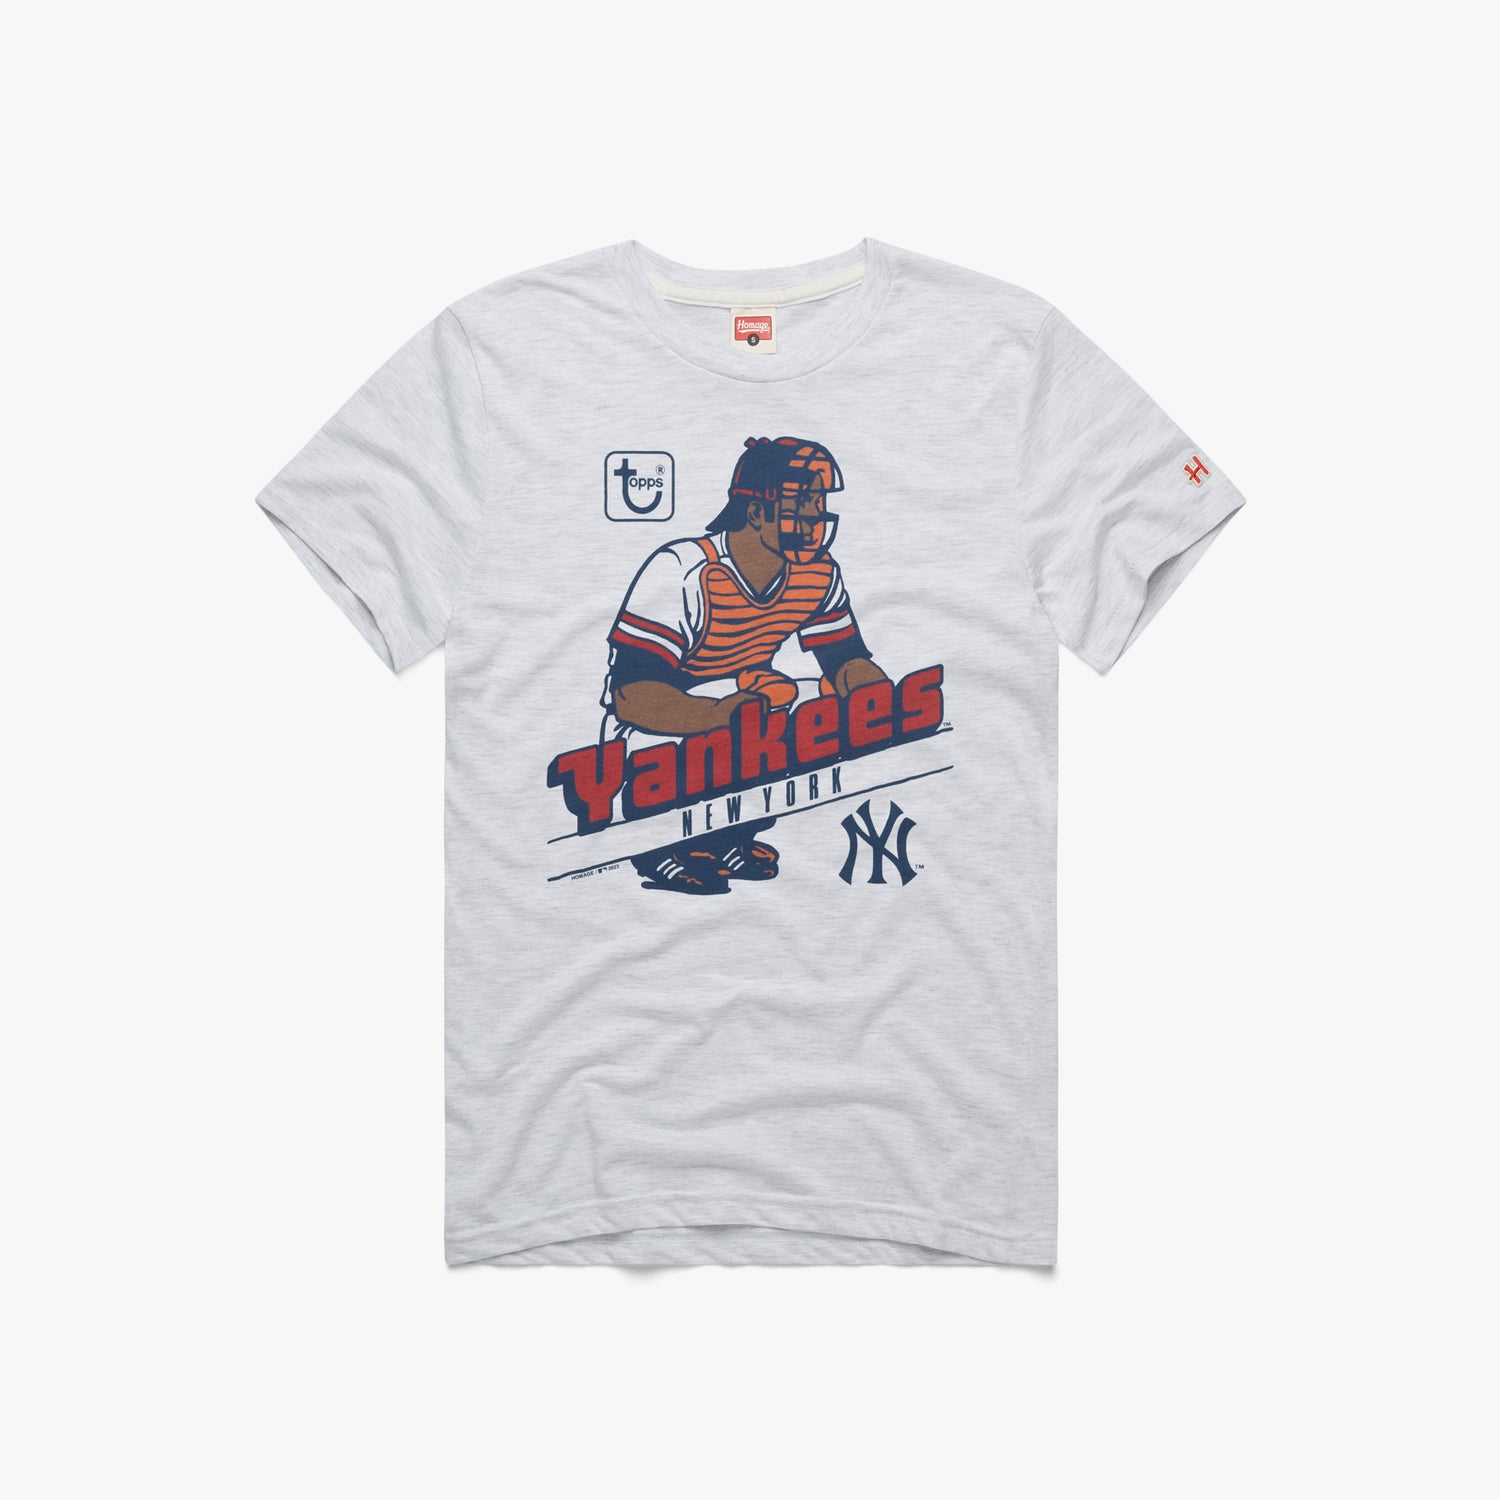 MLB x Topps New York Yankees T-Shirt from Homage. | Ash | Vintage Apparel from Homage.